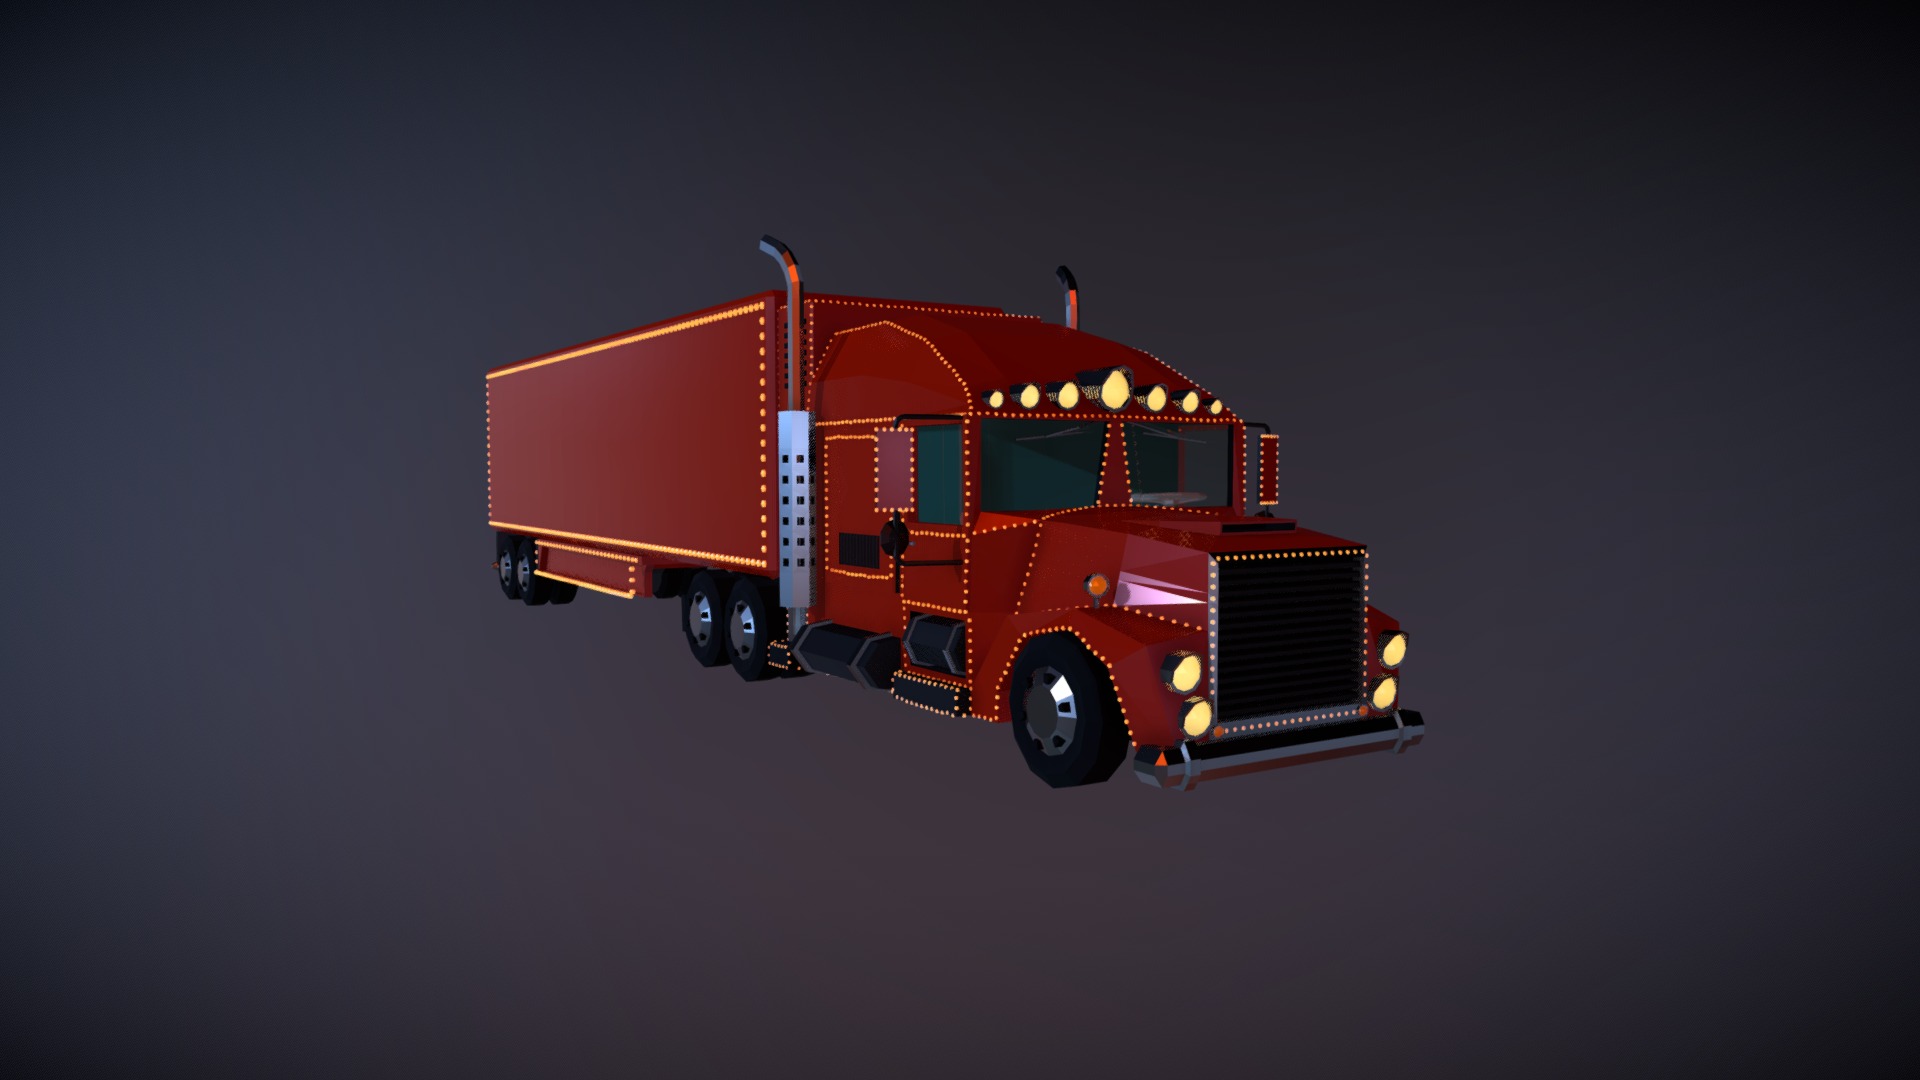 3D model Low Poly Christmas Truck - This is a 3D model of the Low Poly Christmas Truck. The 3D model is about a red truck with lights.